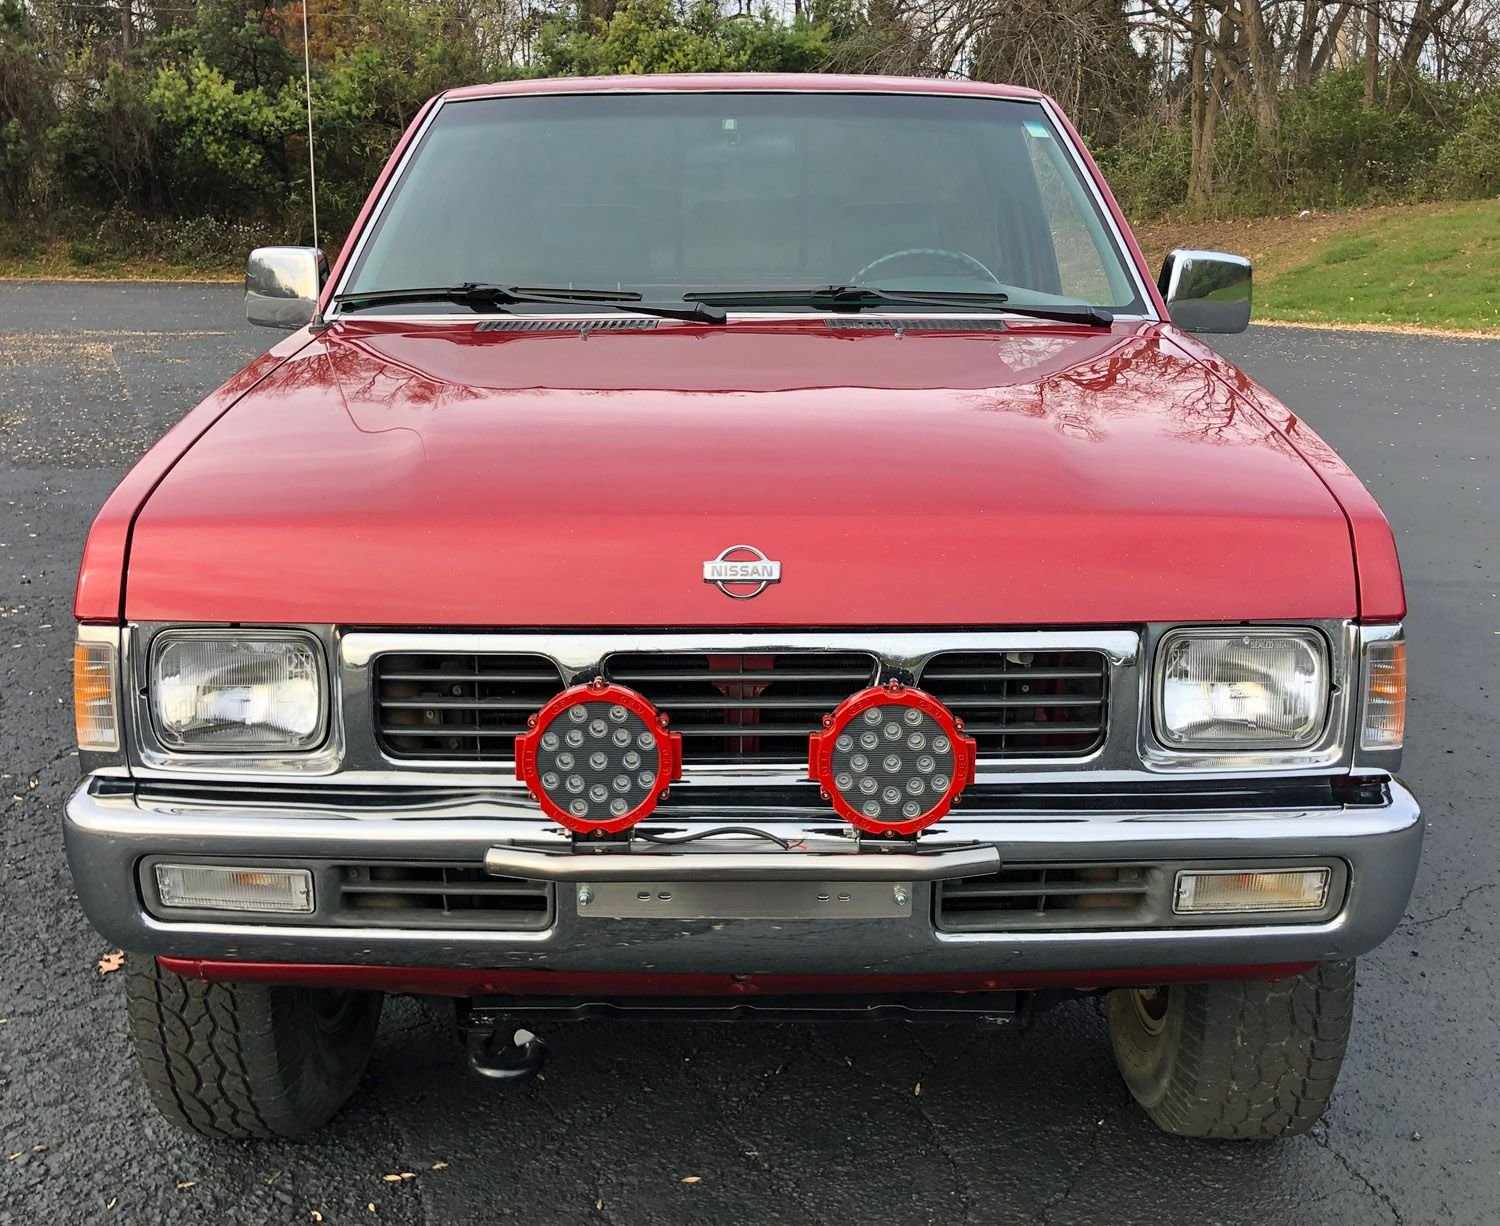 1997 Nissan XE Pick-up Truck